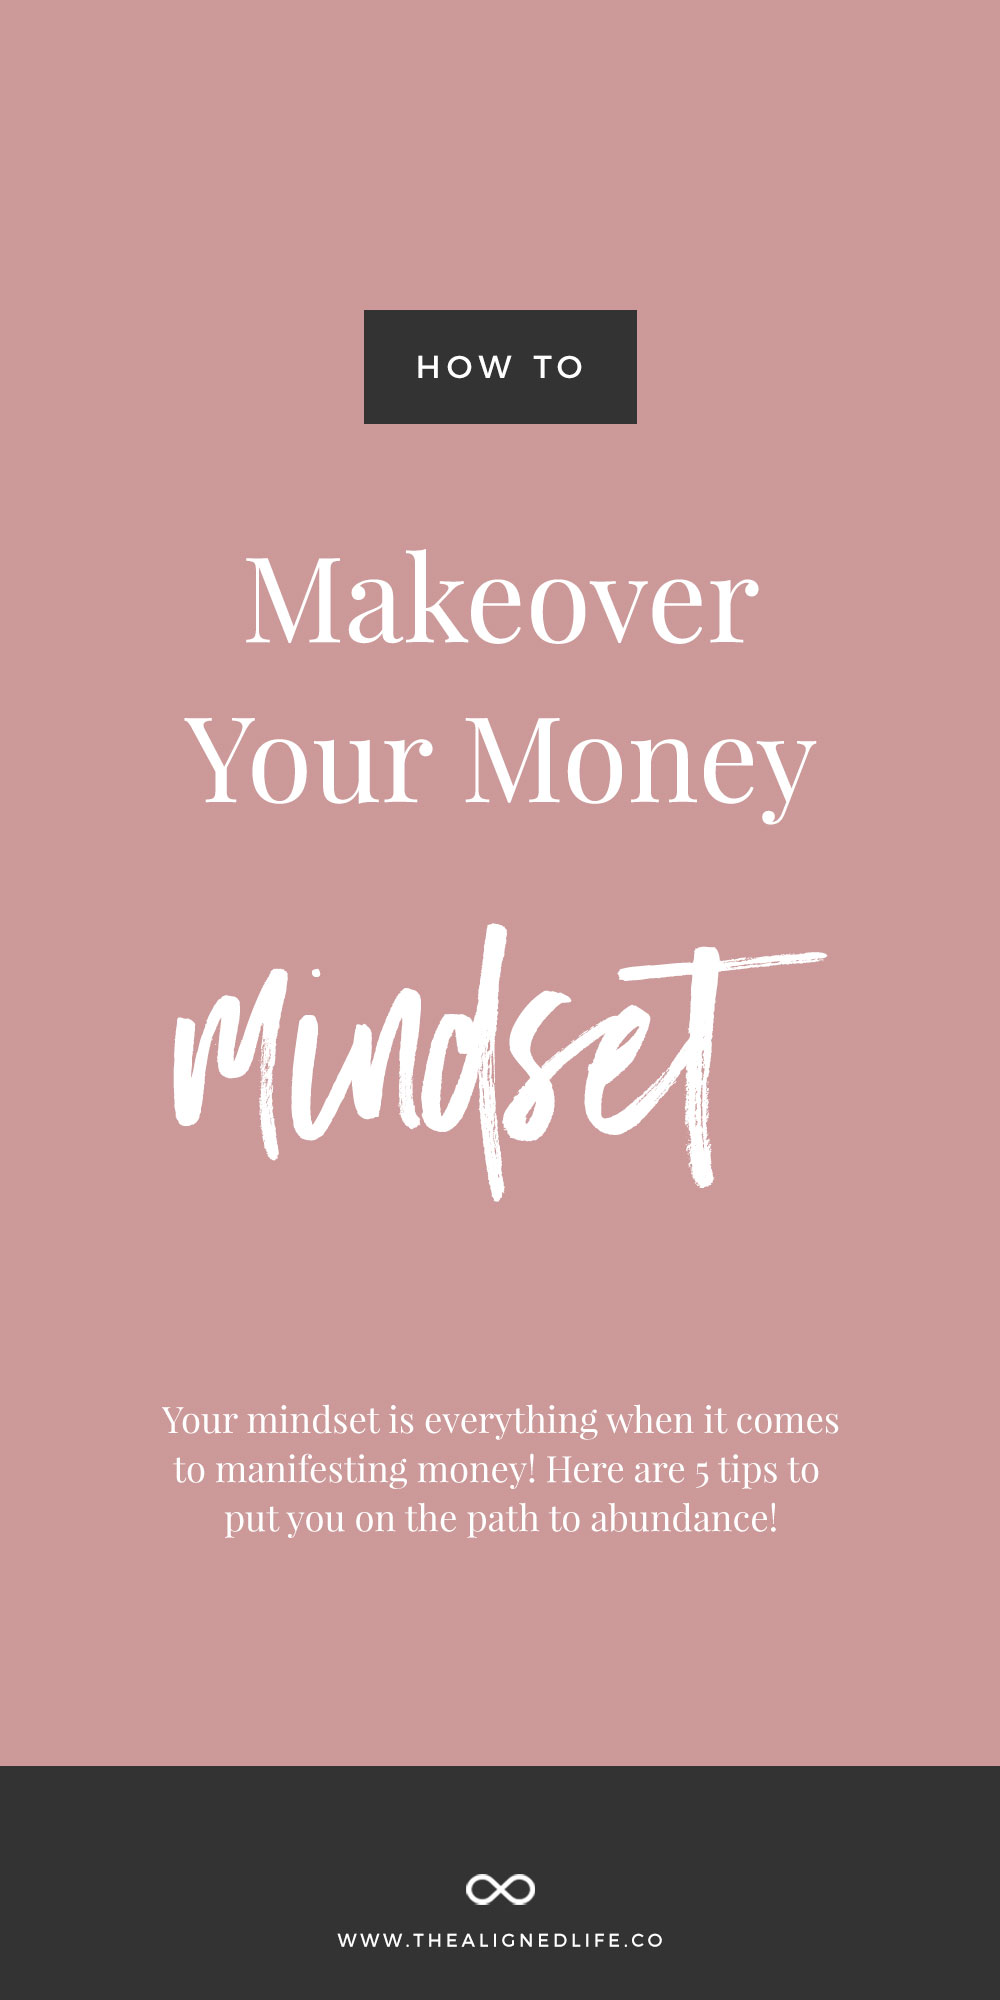 How To Makeover Your Money Mindset